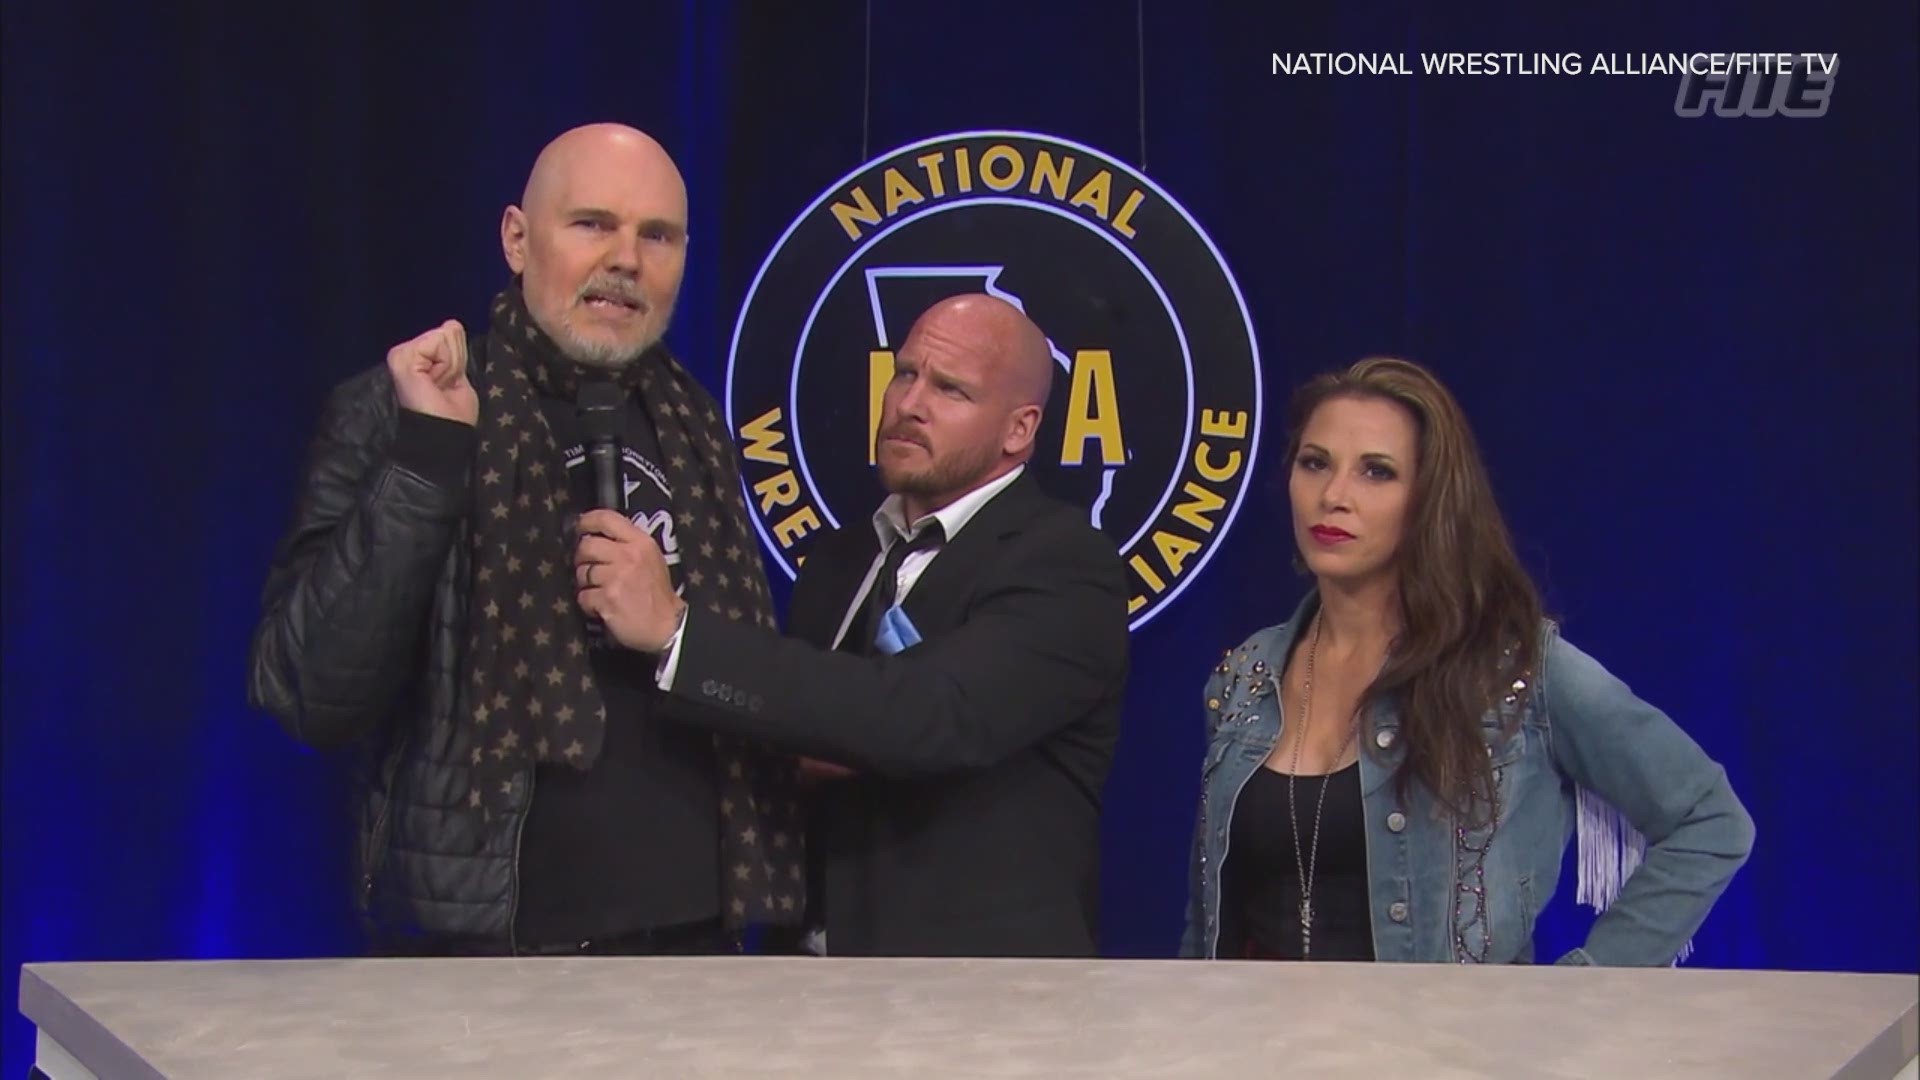 The NWA plans to host four nights of wrestling in August, including "Empower," an all-women's event, and "NWA 73"